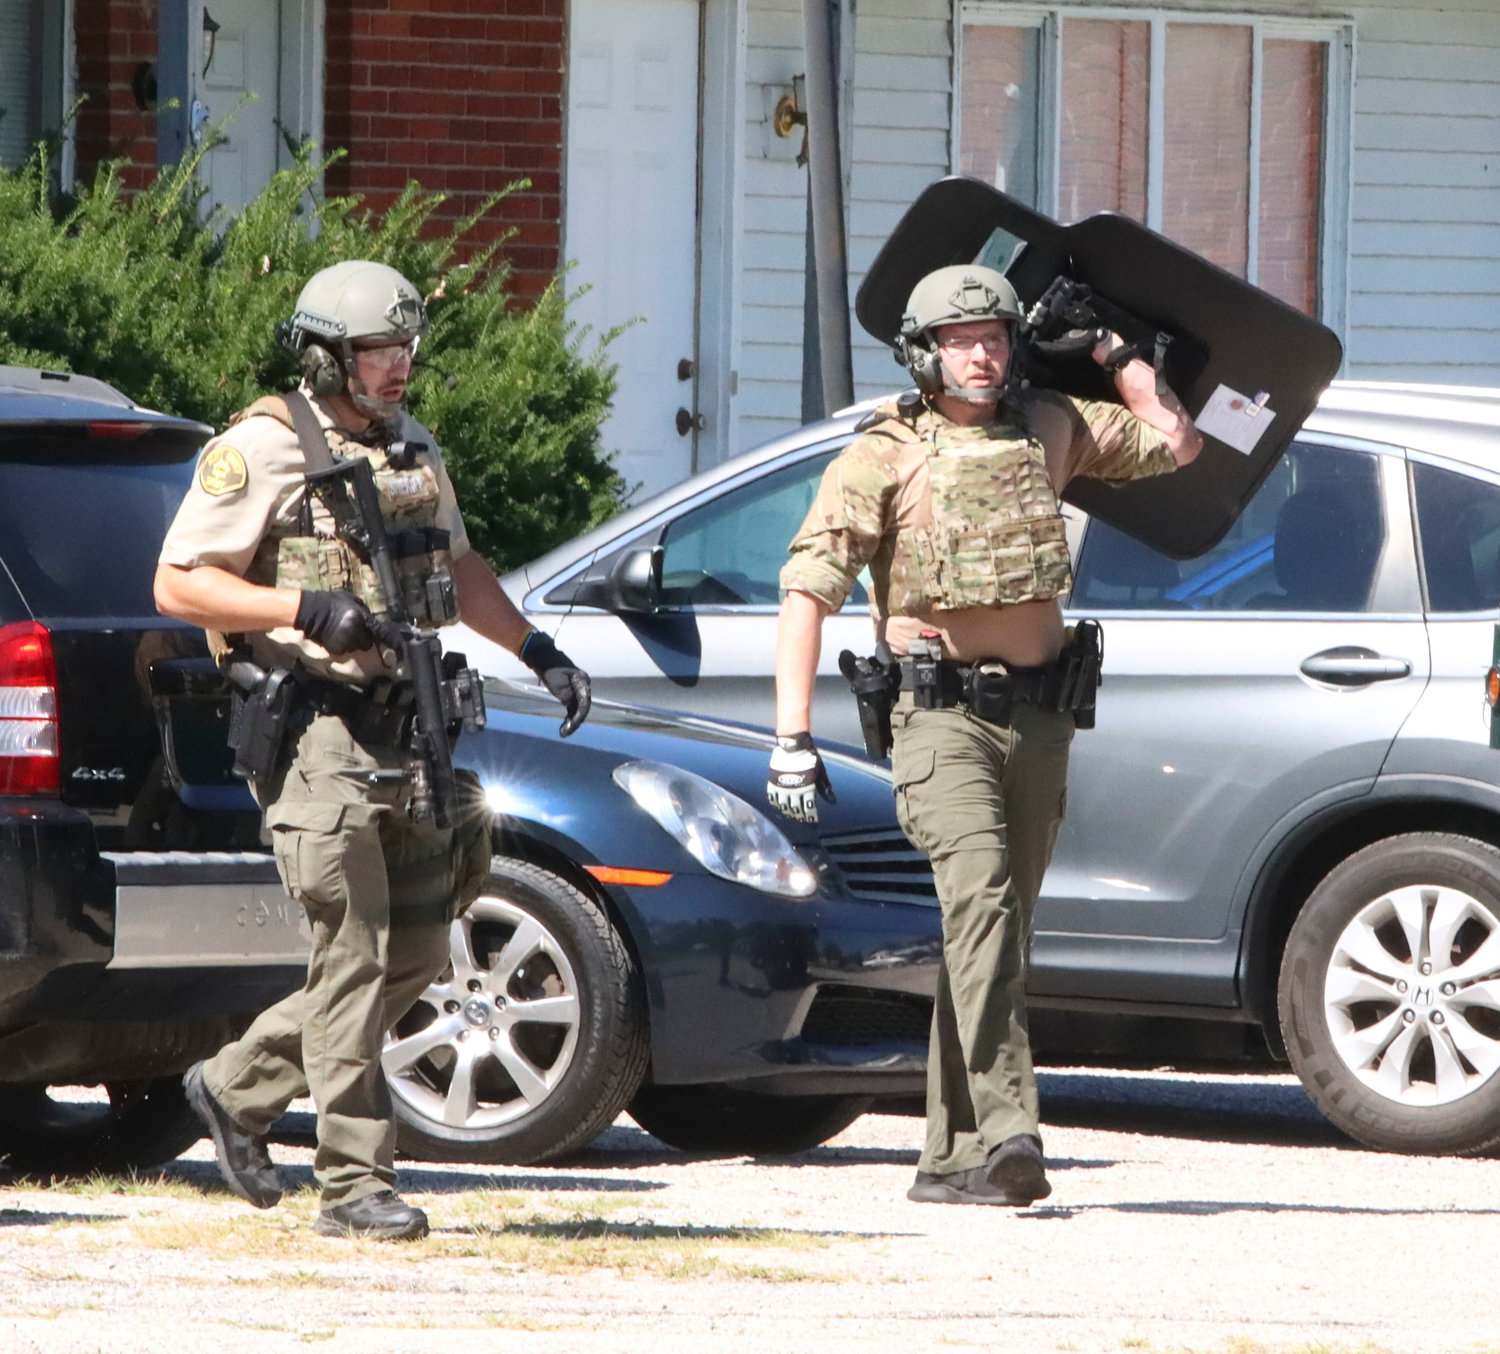 Scott County deputies brought shields and rifles to the Park View apartment.